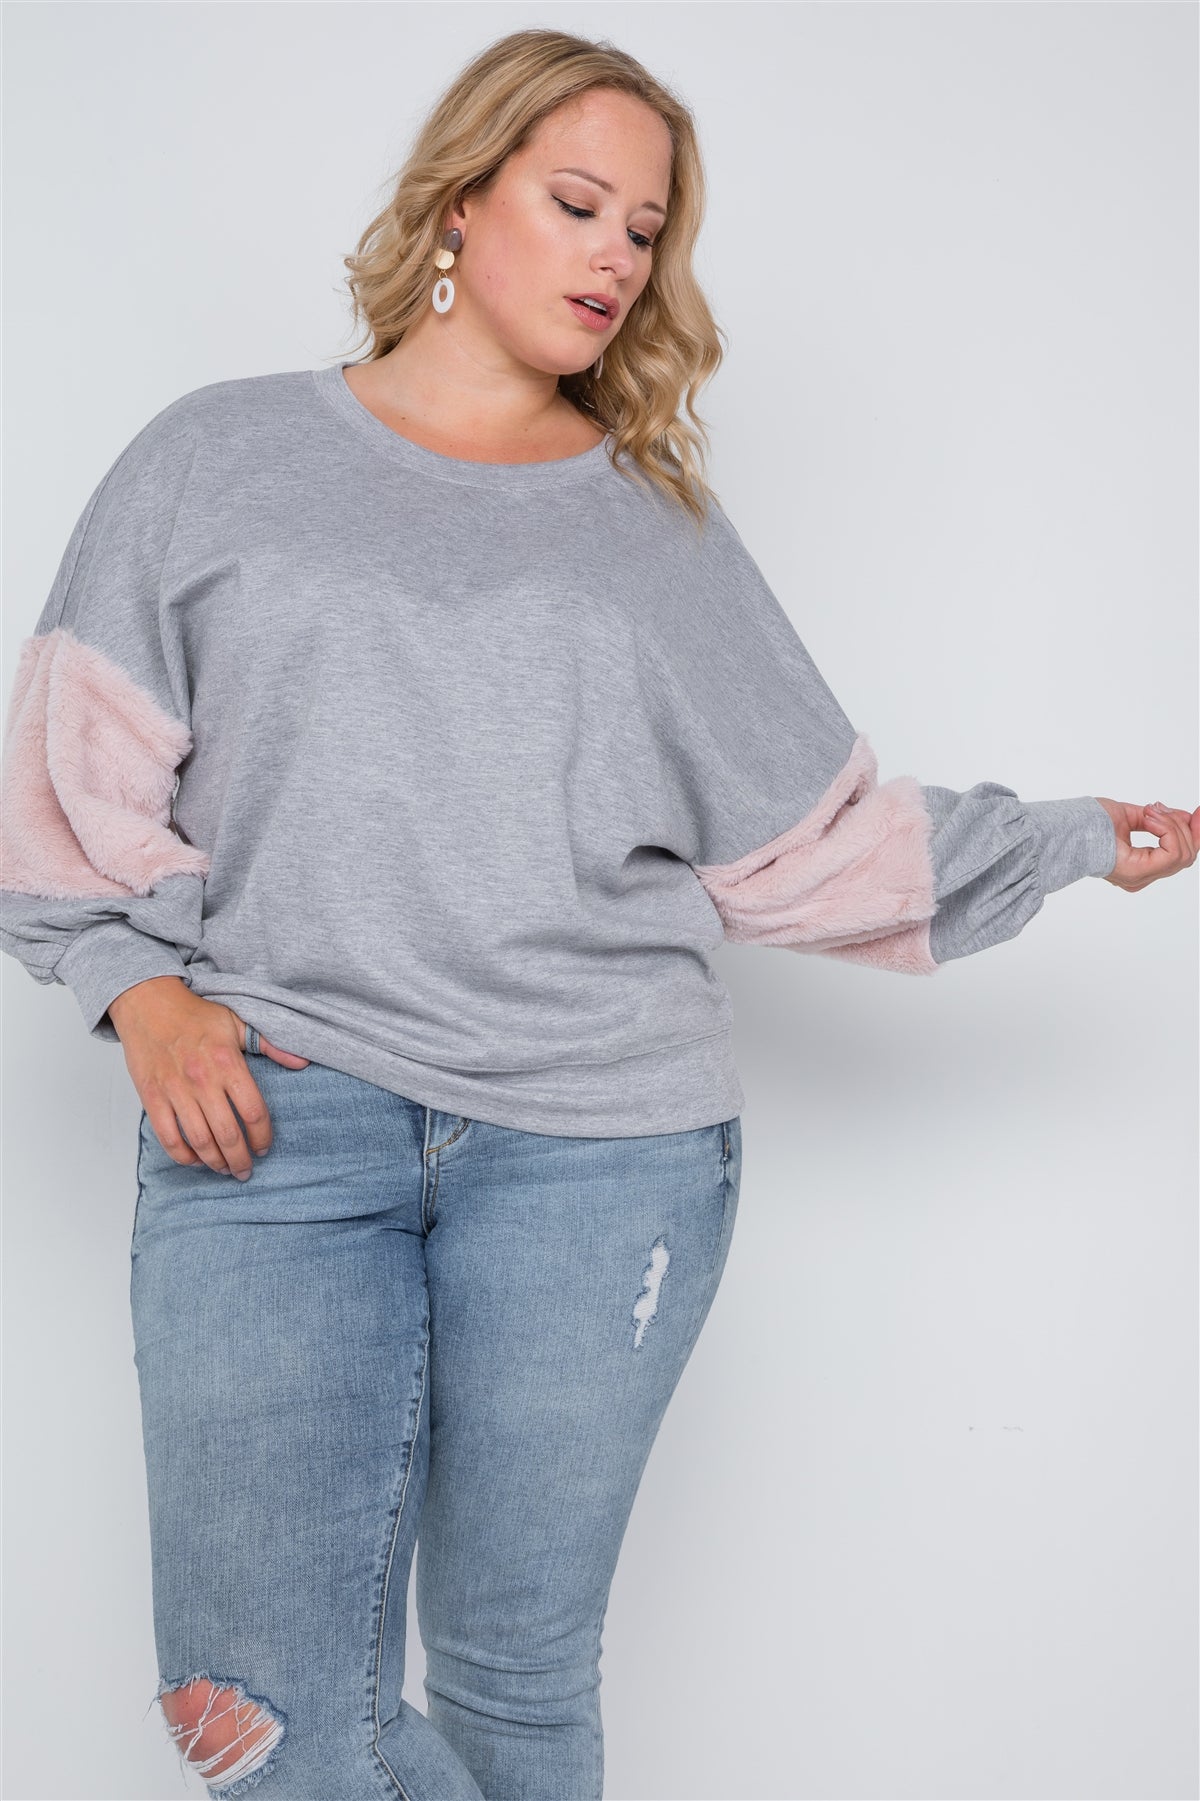 Plus Size Faux Fur Pink Sleeves Sweater